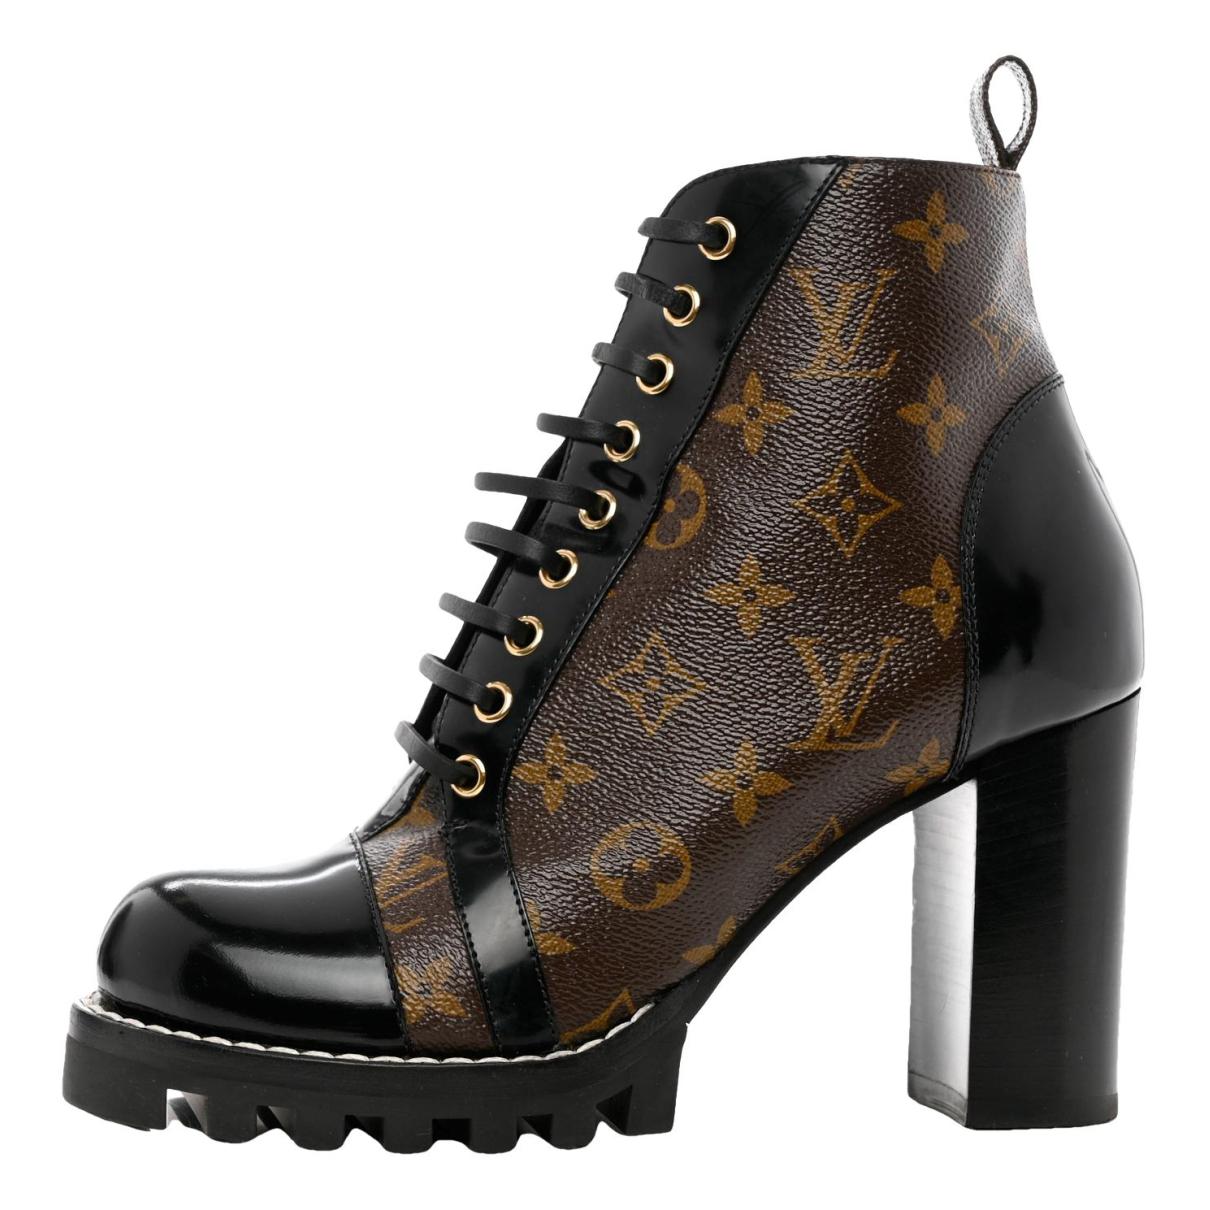 Buy [Shoes] LOUIS VUITTON Louis Vuitton Monogram Star Trail Line Ankle Boots  Lace-Up Boots Enamel #38 1/2 Japan Size Approx. 25cm 1A2Y7W from Japan -  Buy authentic Plus exclusive items from Japan